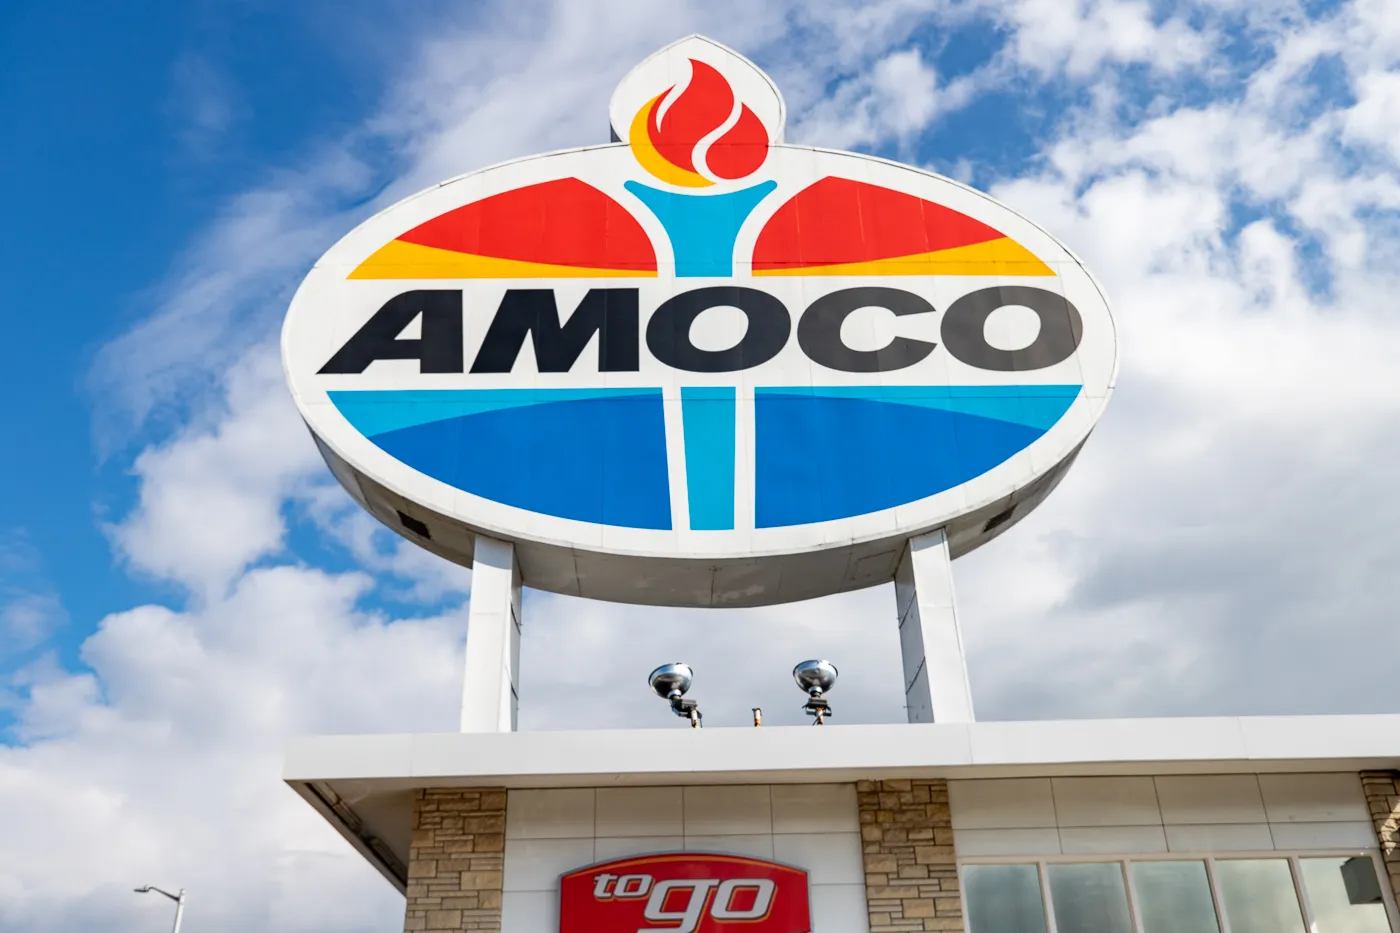 World's Largest Amoco Sign in St. Louis, Missouri